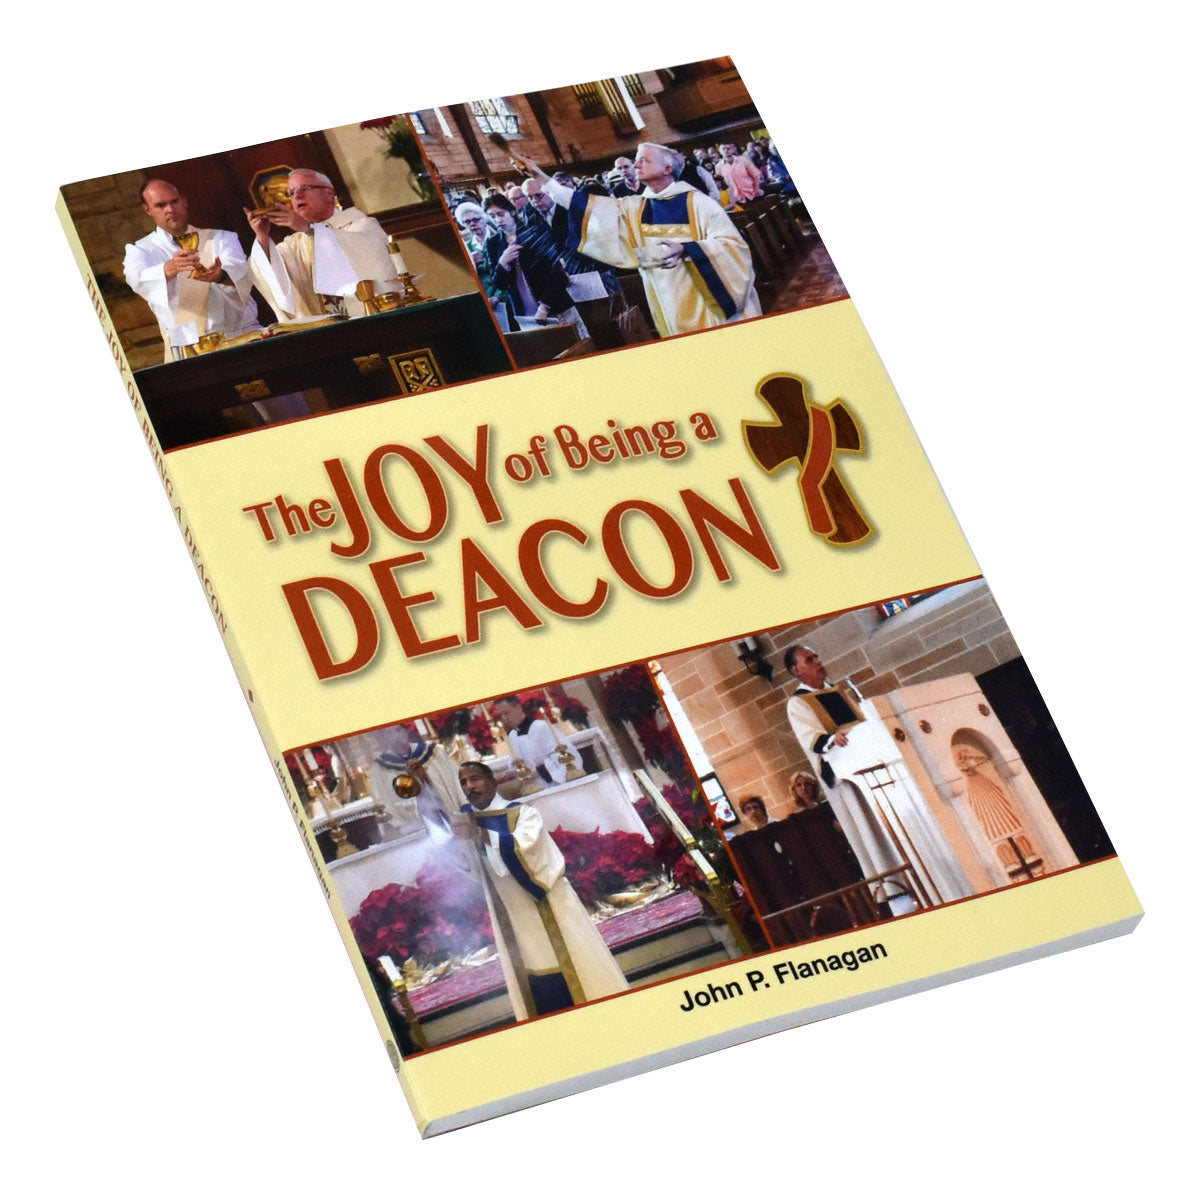 The Joy Of Being A Deacon